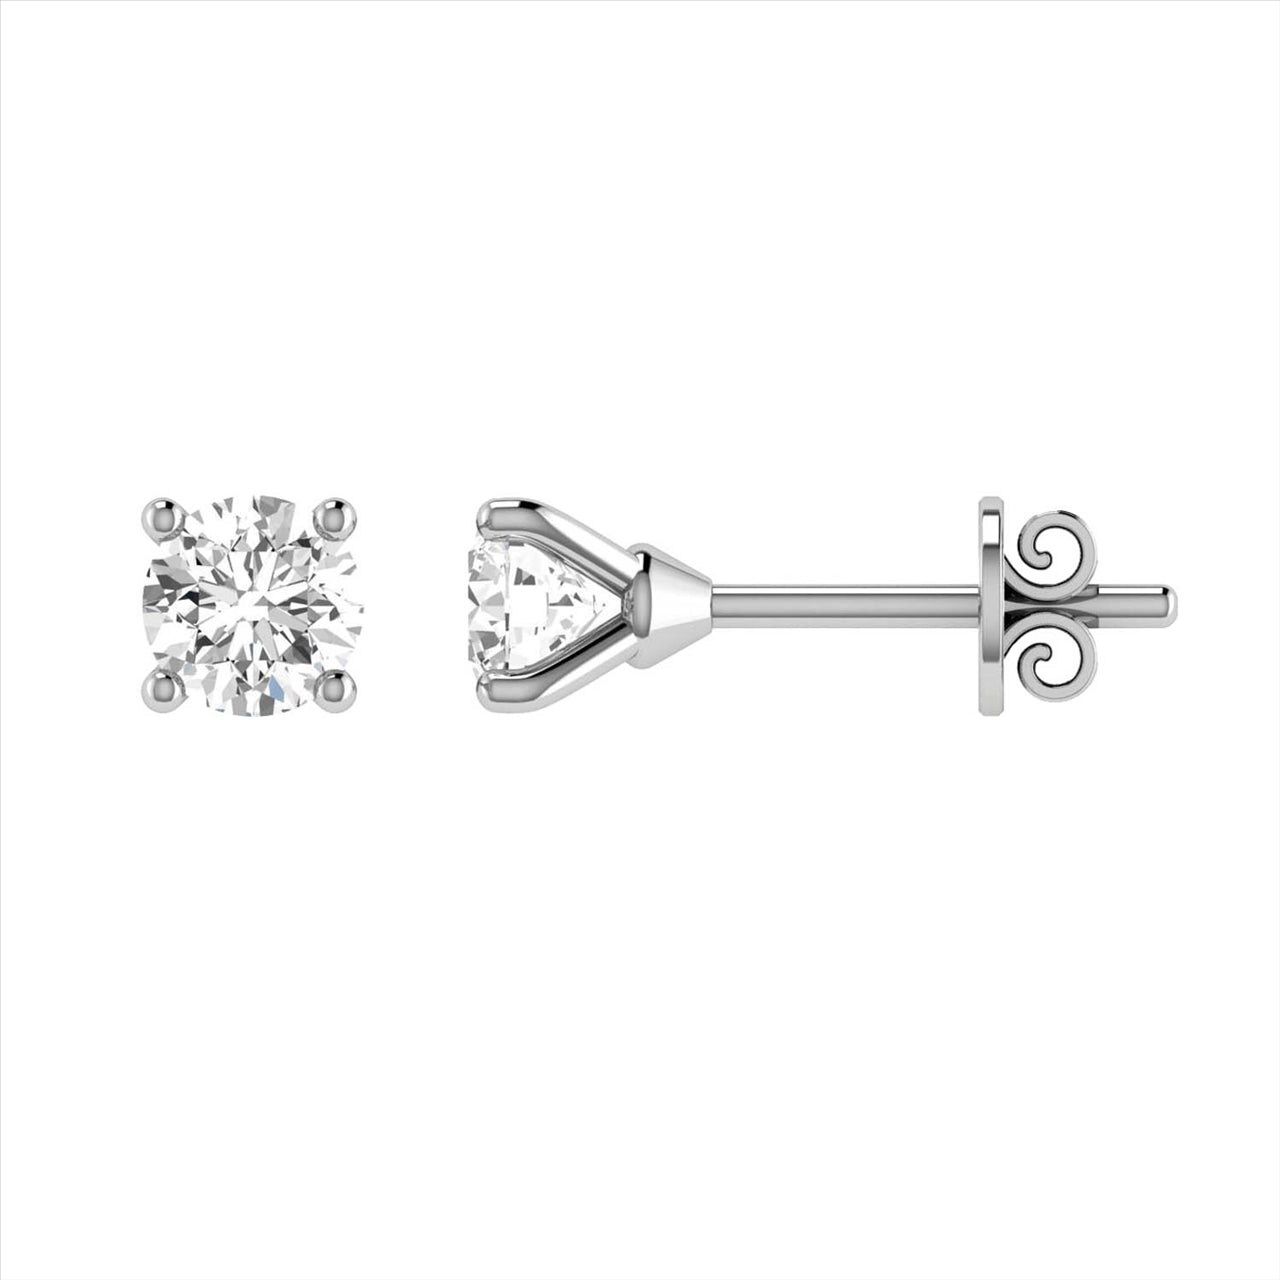 9ct White Gold 4 claw Diamond Stud Earrings